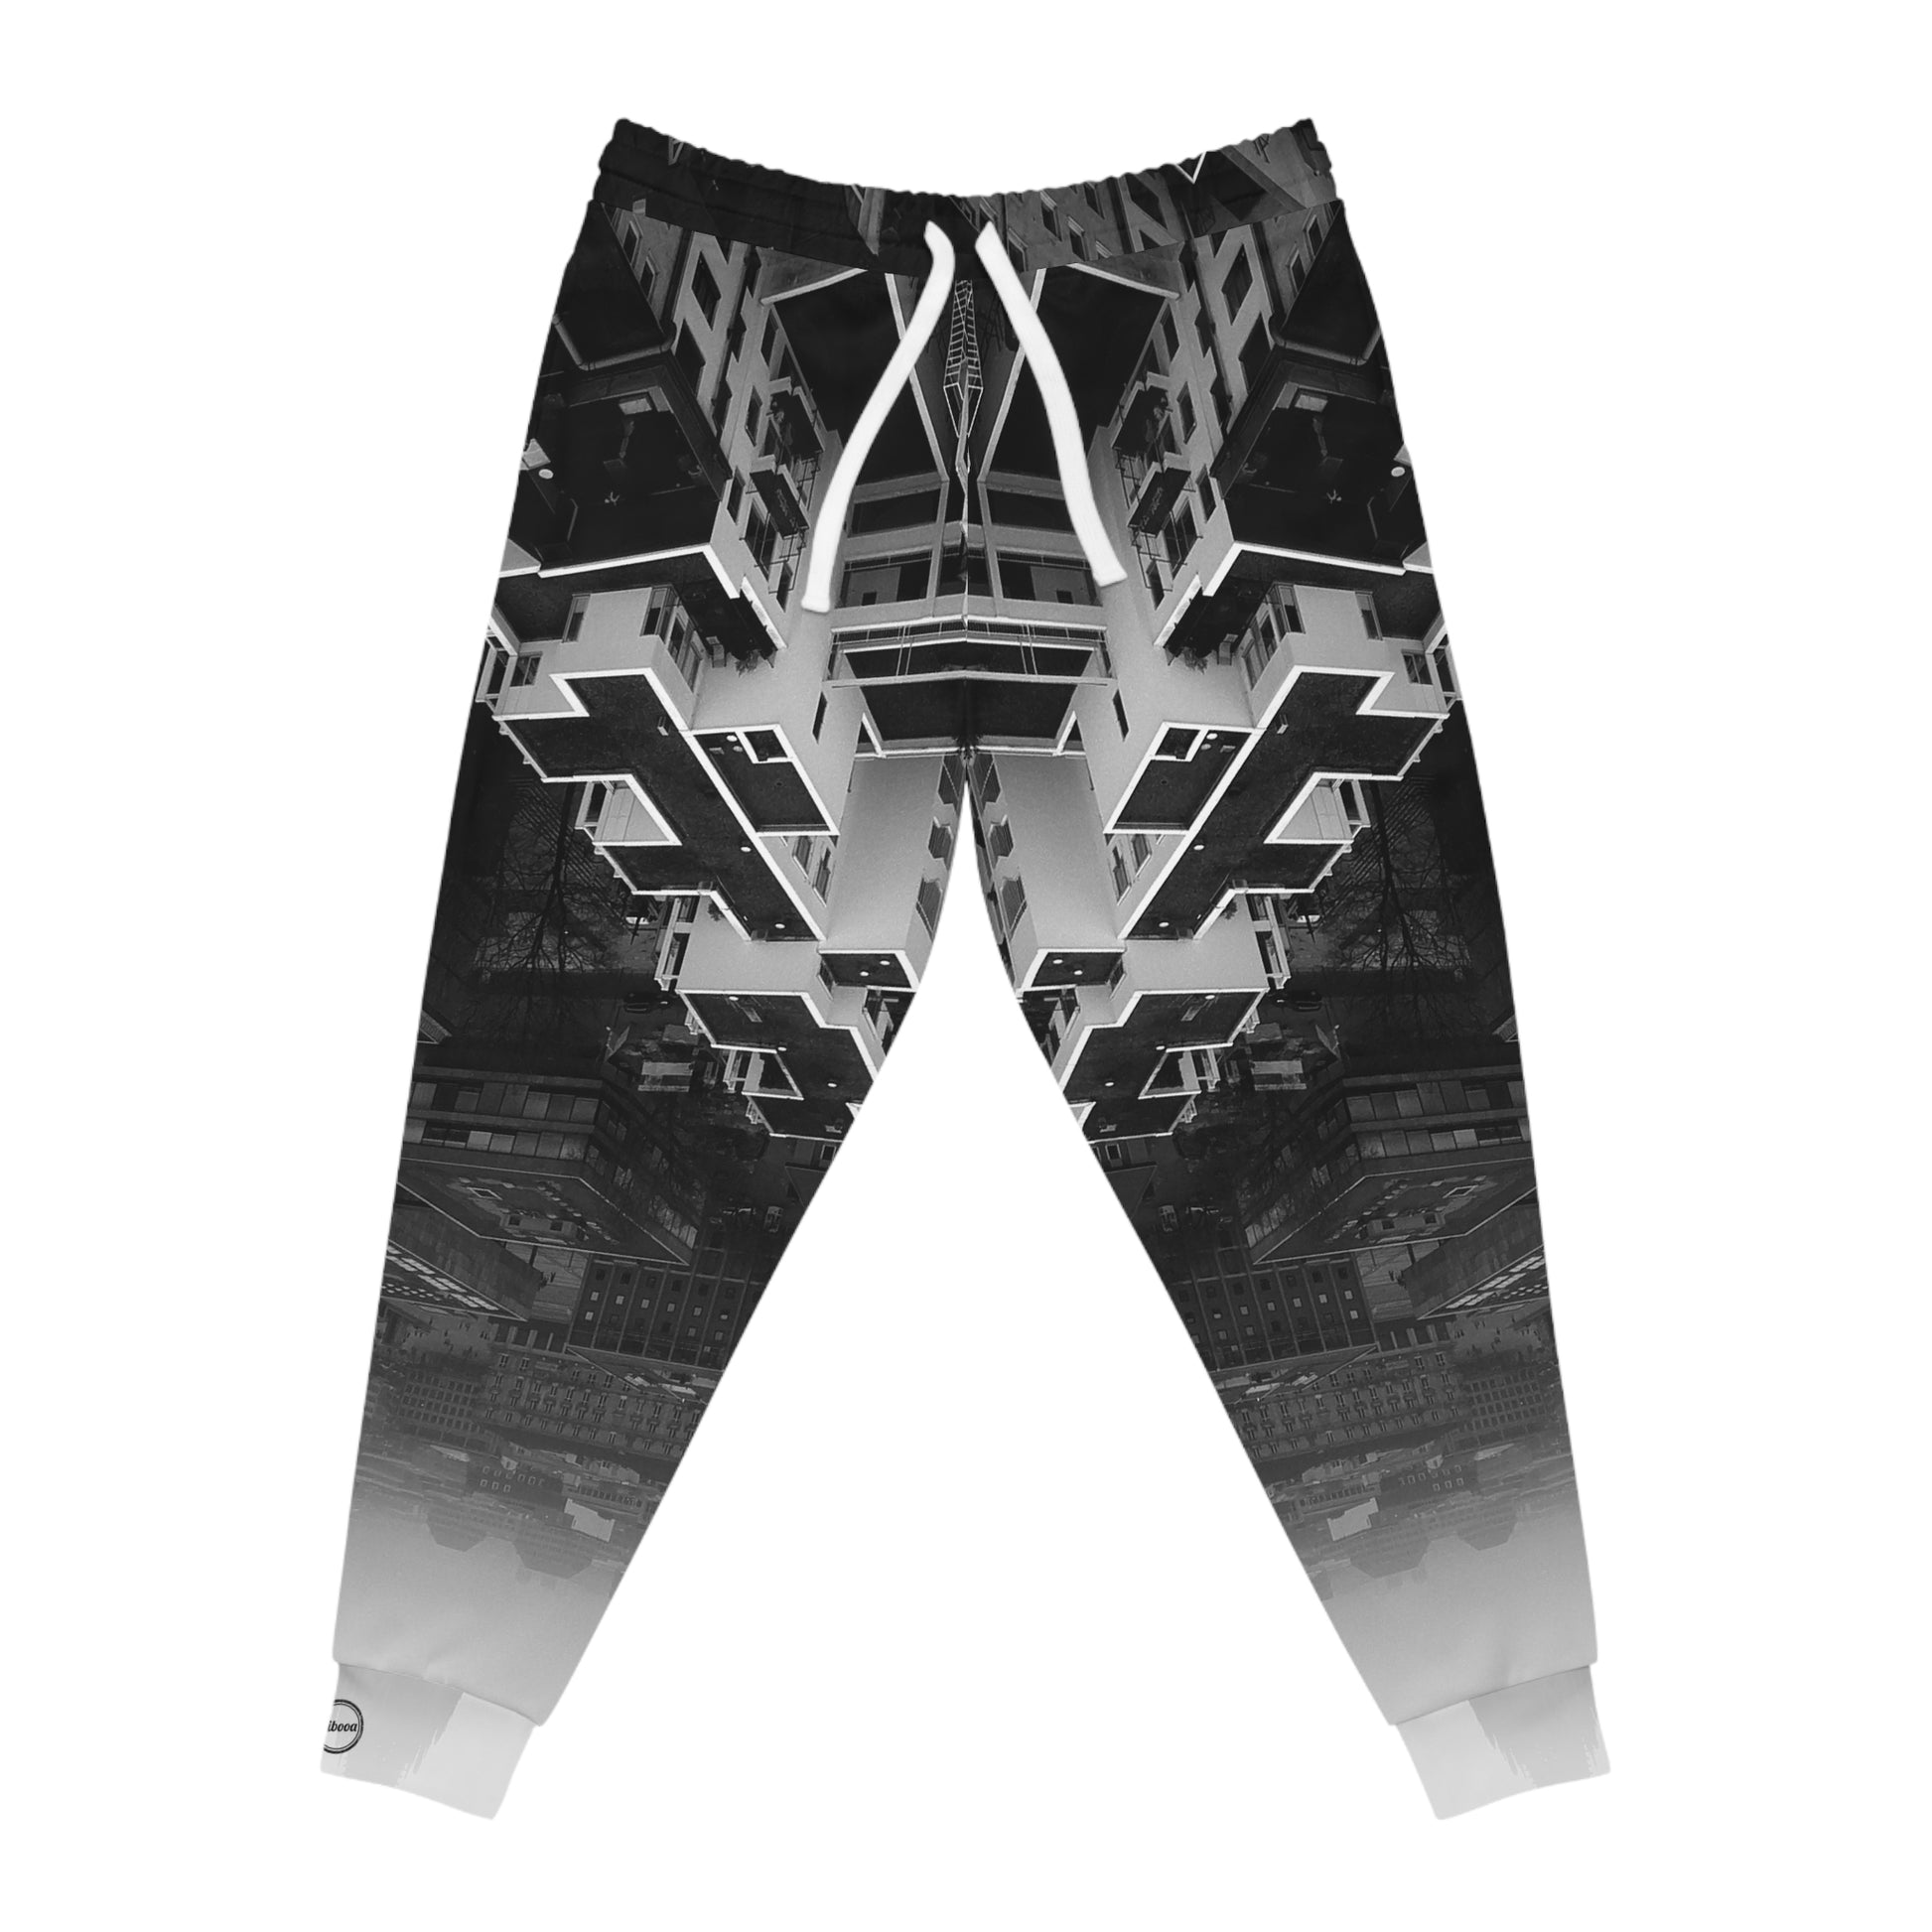 Athletic Joggers For Women | The Block